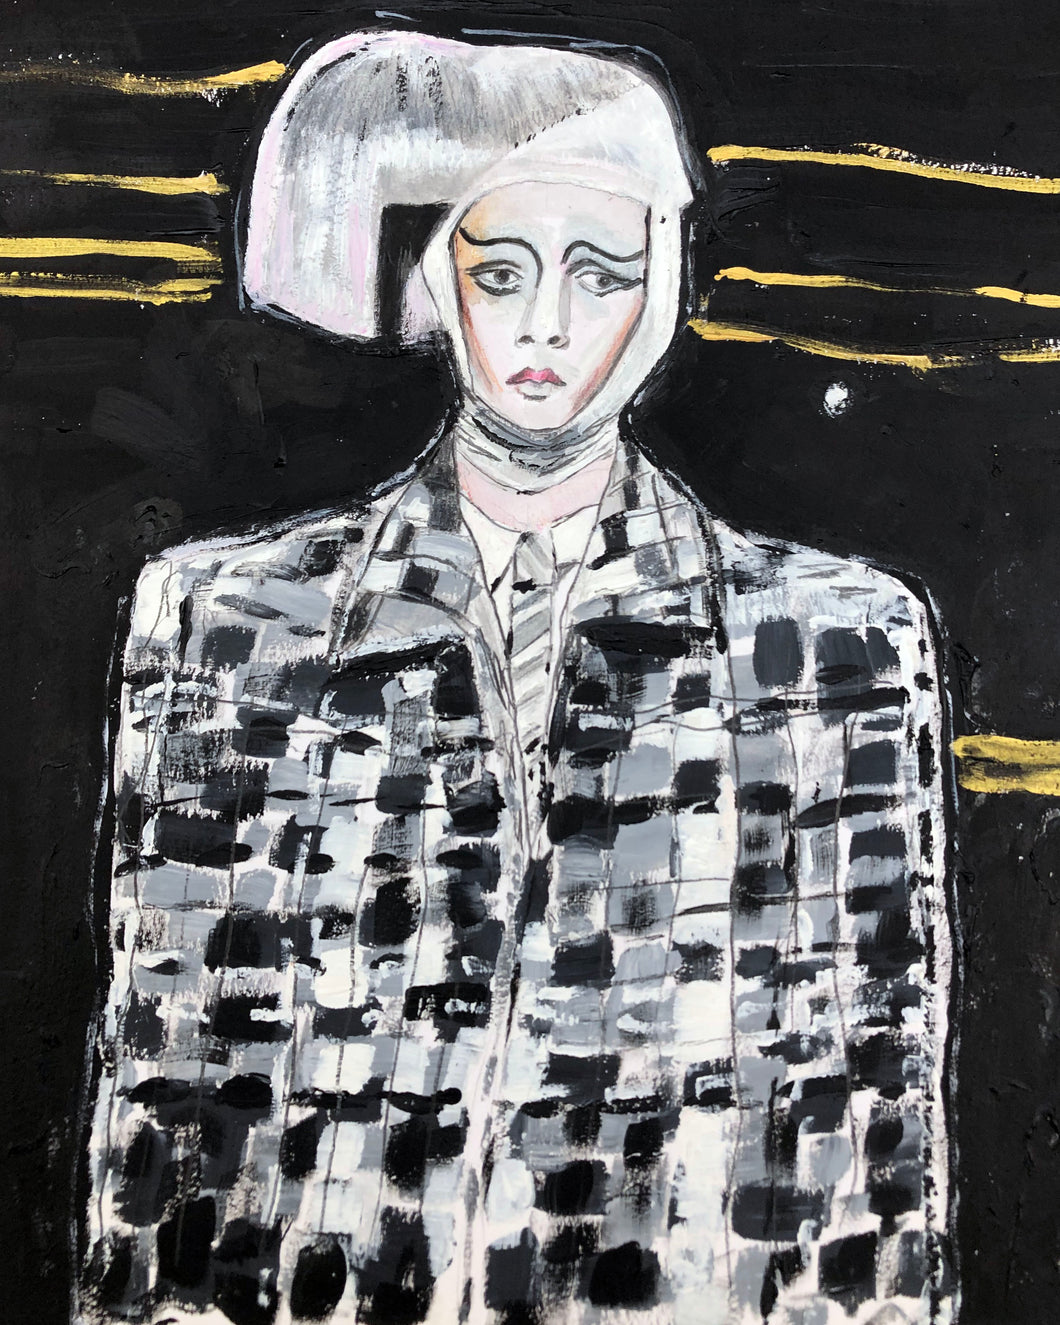 THOM BROWNE A/W '23 couture - 'Fade to Grey'